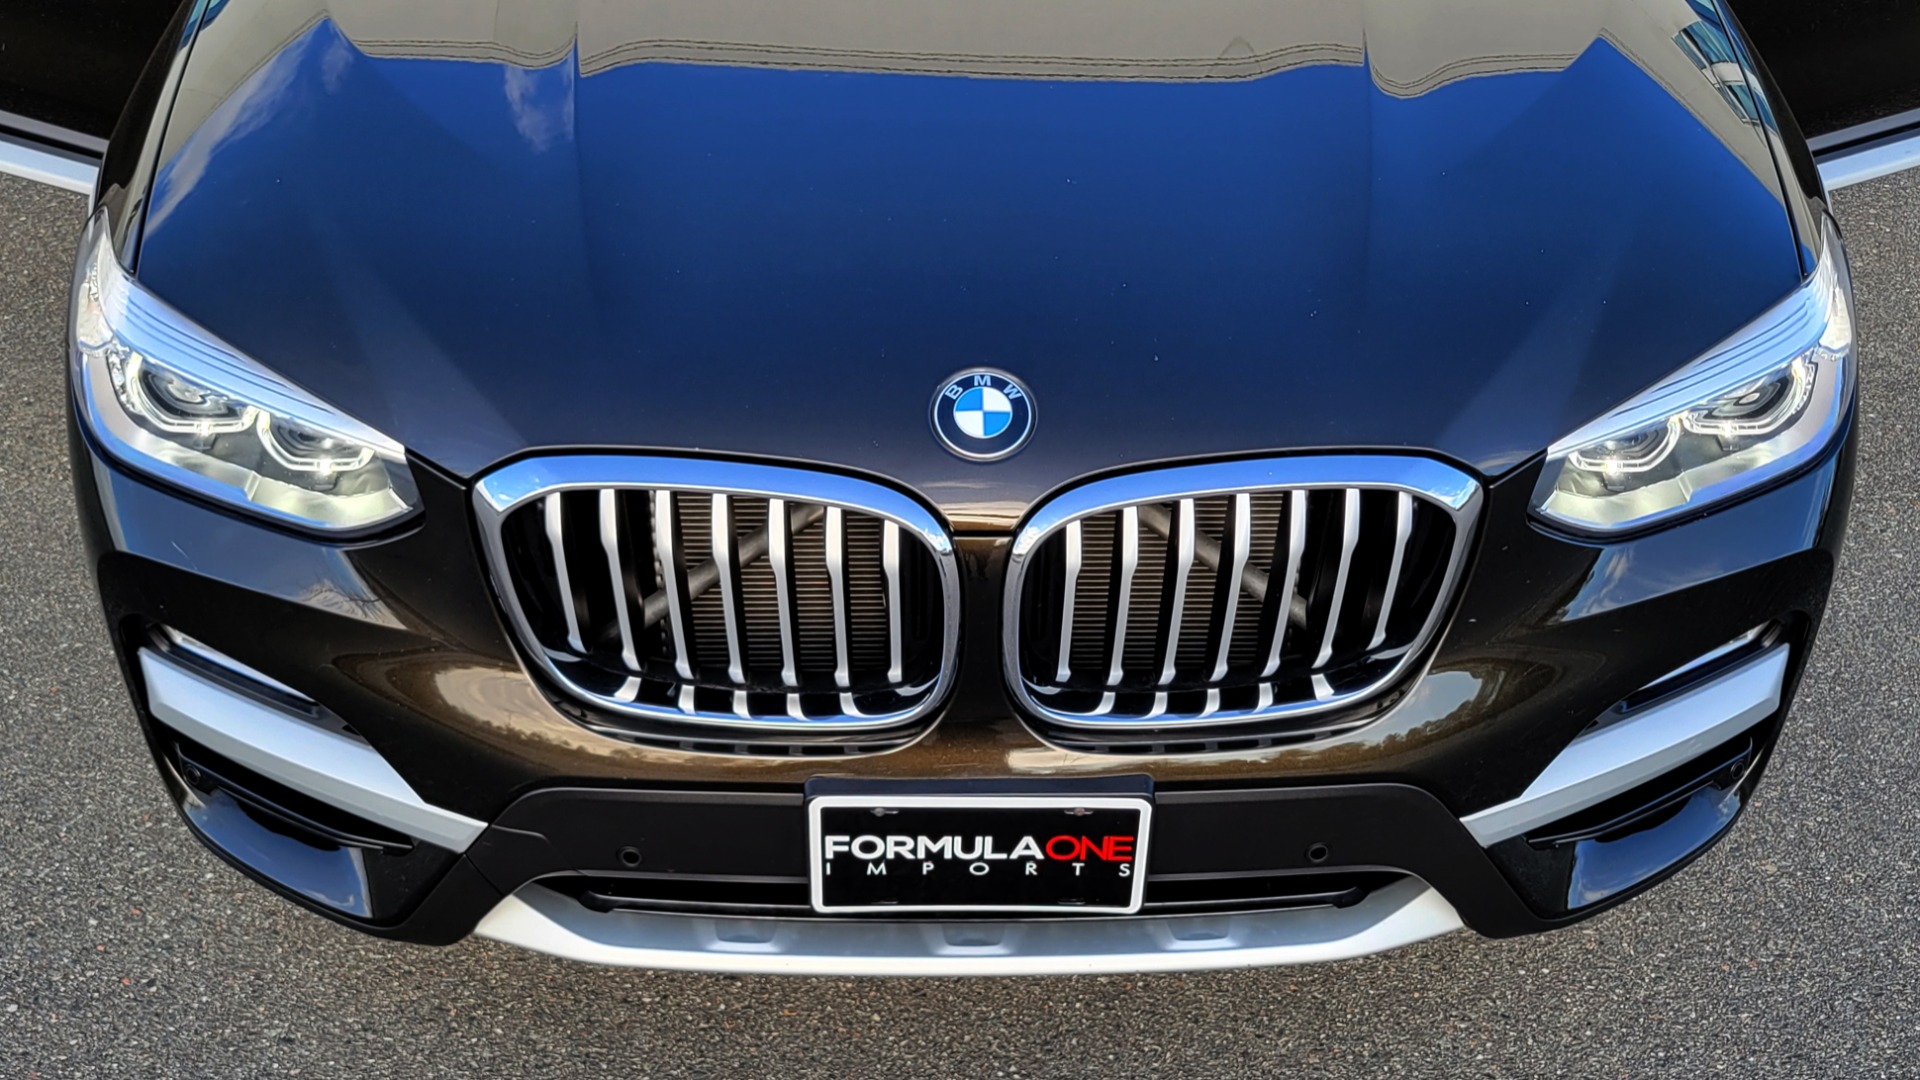 Used 2019 BMW X3 XDRIVE30I 2.0L SUV / NAV / PANO-ROOF / DRVR ASST / HTD STS / REARVIEW for sale $40,595 at Formula Imports in Charlotte NC 28227 27